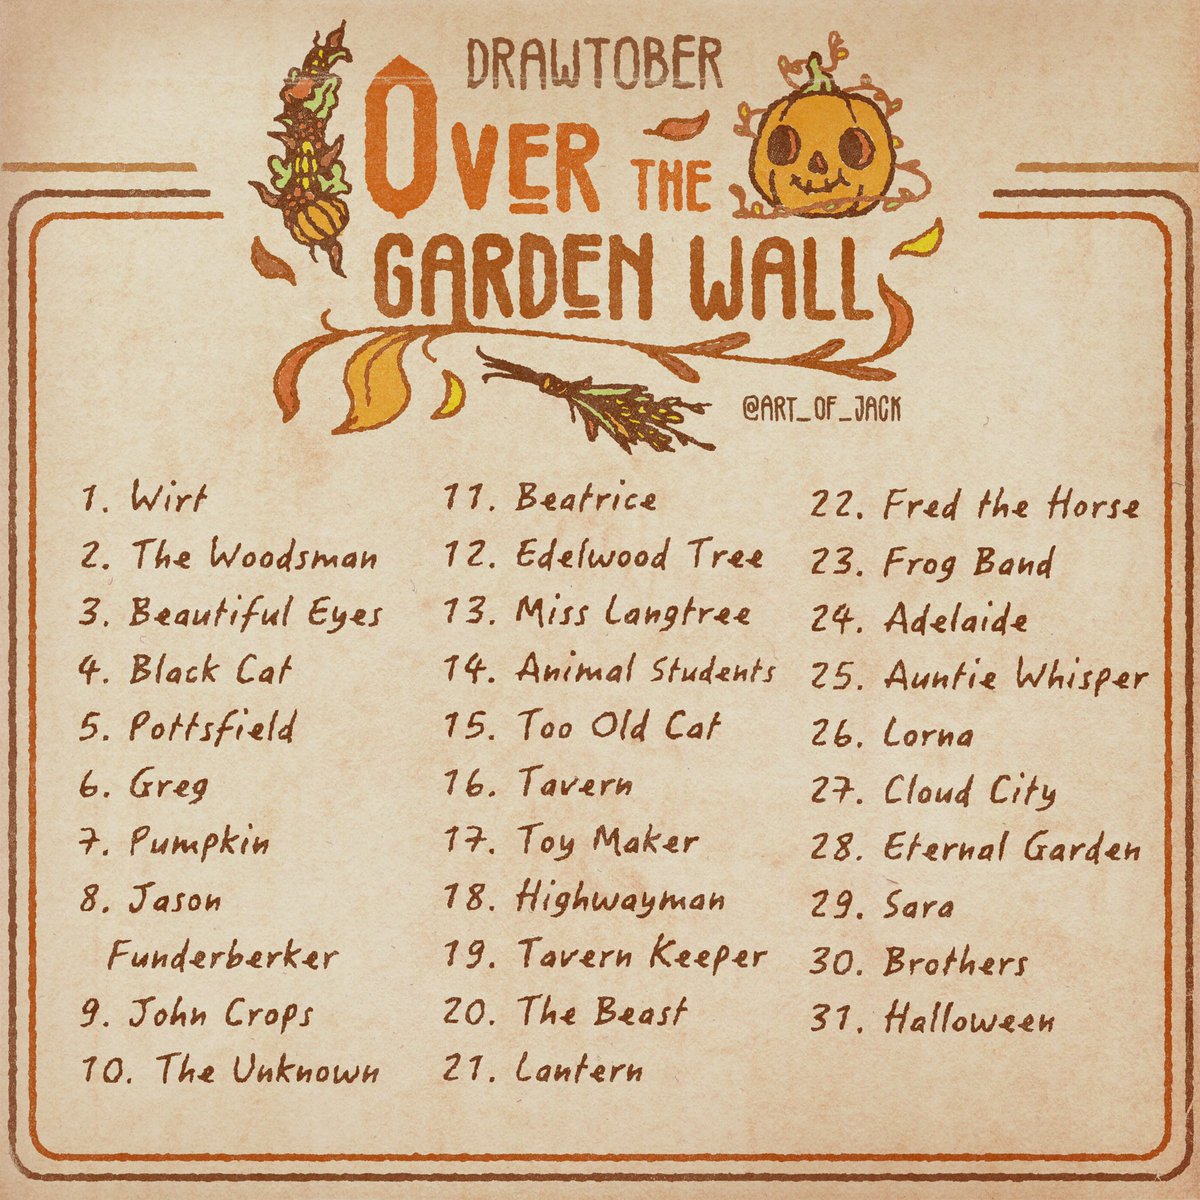  It’s that time of year! •I decided to make my own prompt list for drawtober and wanted to base it on something that’s not only inspiring to me, but exciting to others as well. So here it IS! The Over the Garden Wall prompt list.